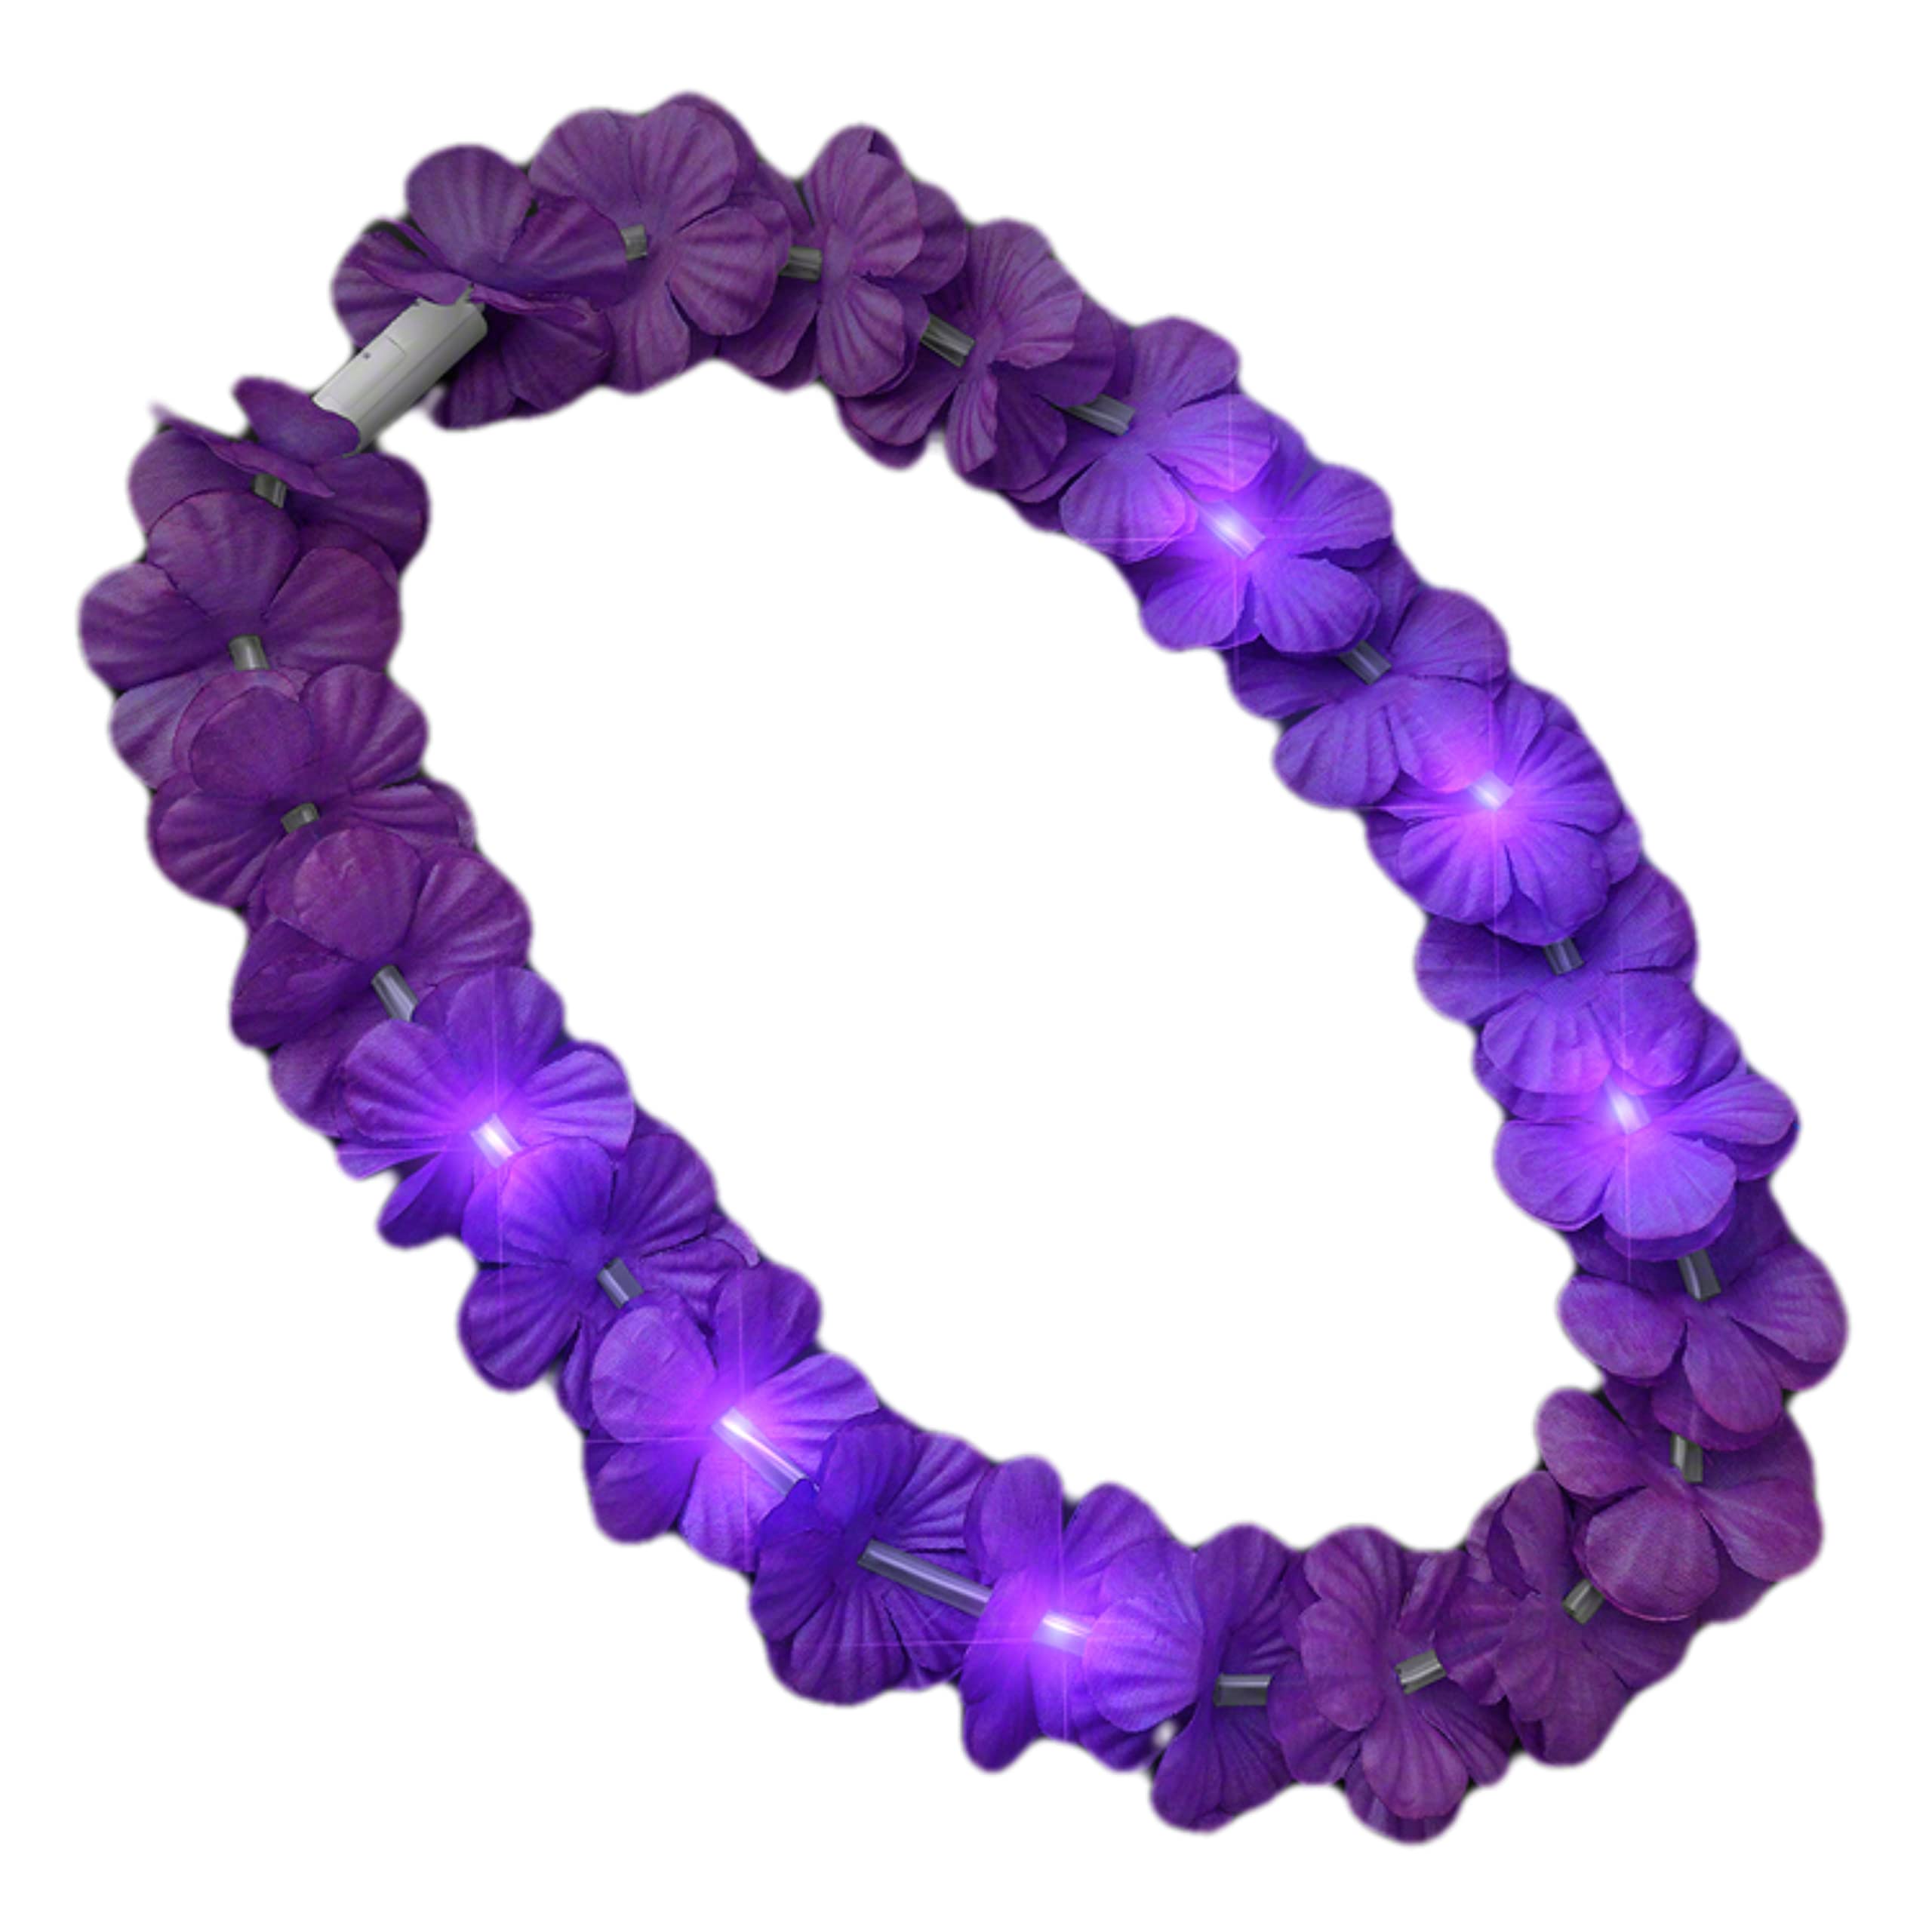 Blinkee LED Hawaiian Flower Lei Necklace - Purple Light-Up Luau Party Accessory: Non-Metallic, 6 LEDs, Replaceable Batteries